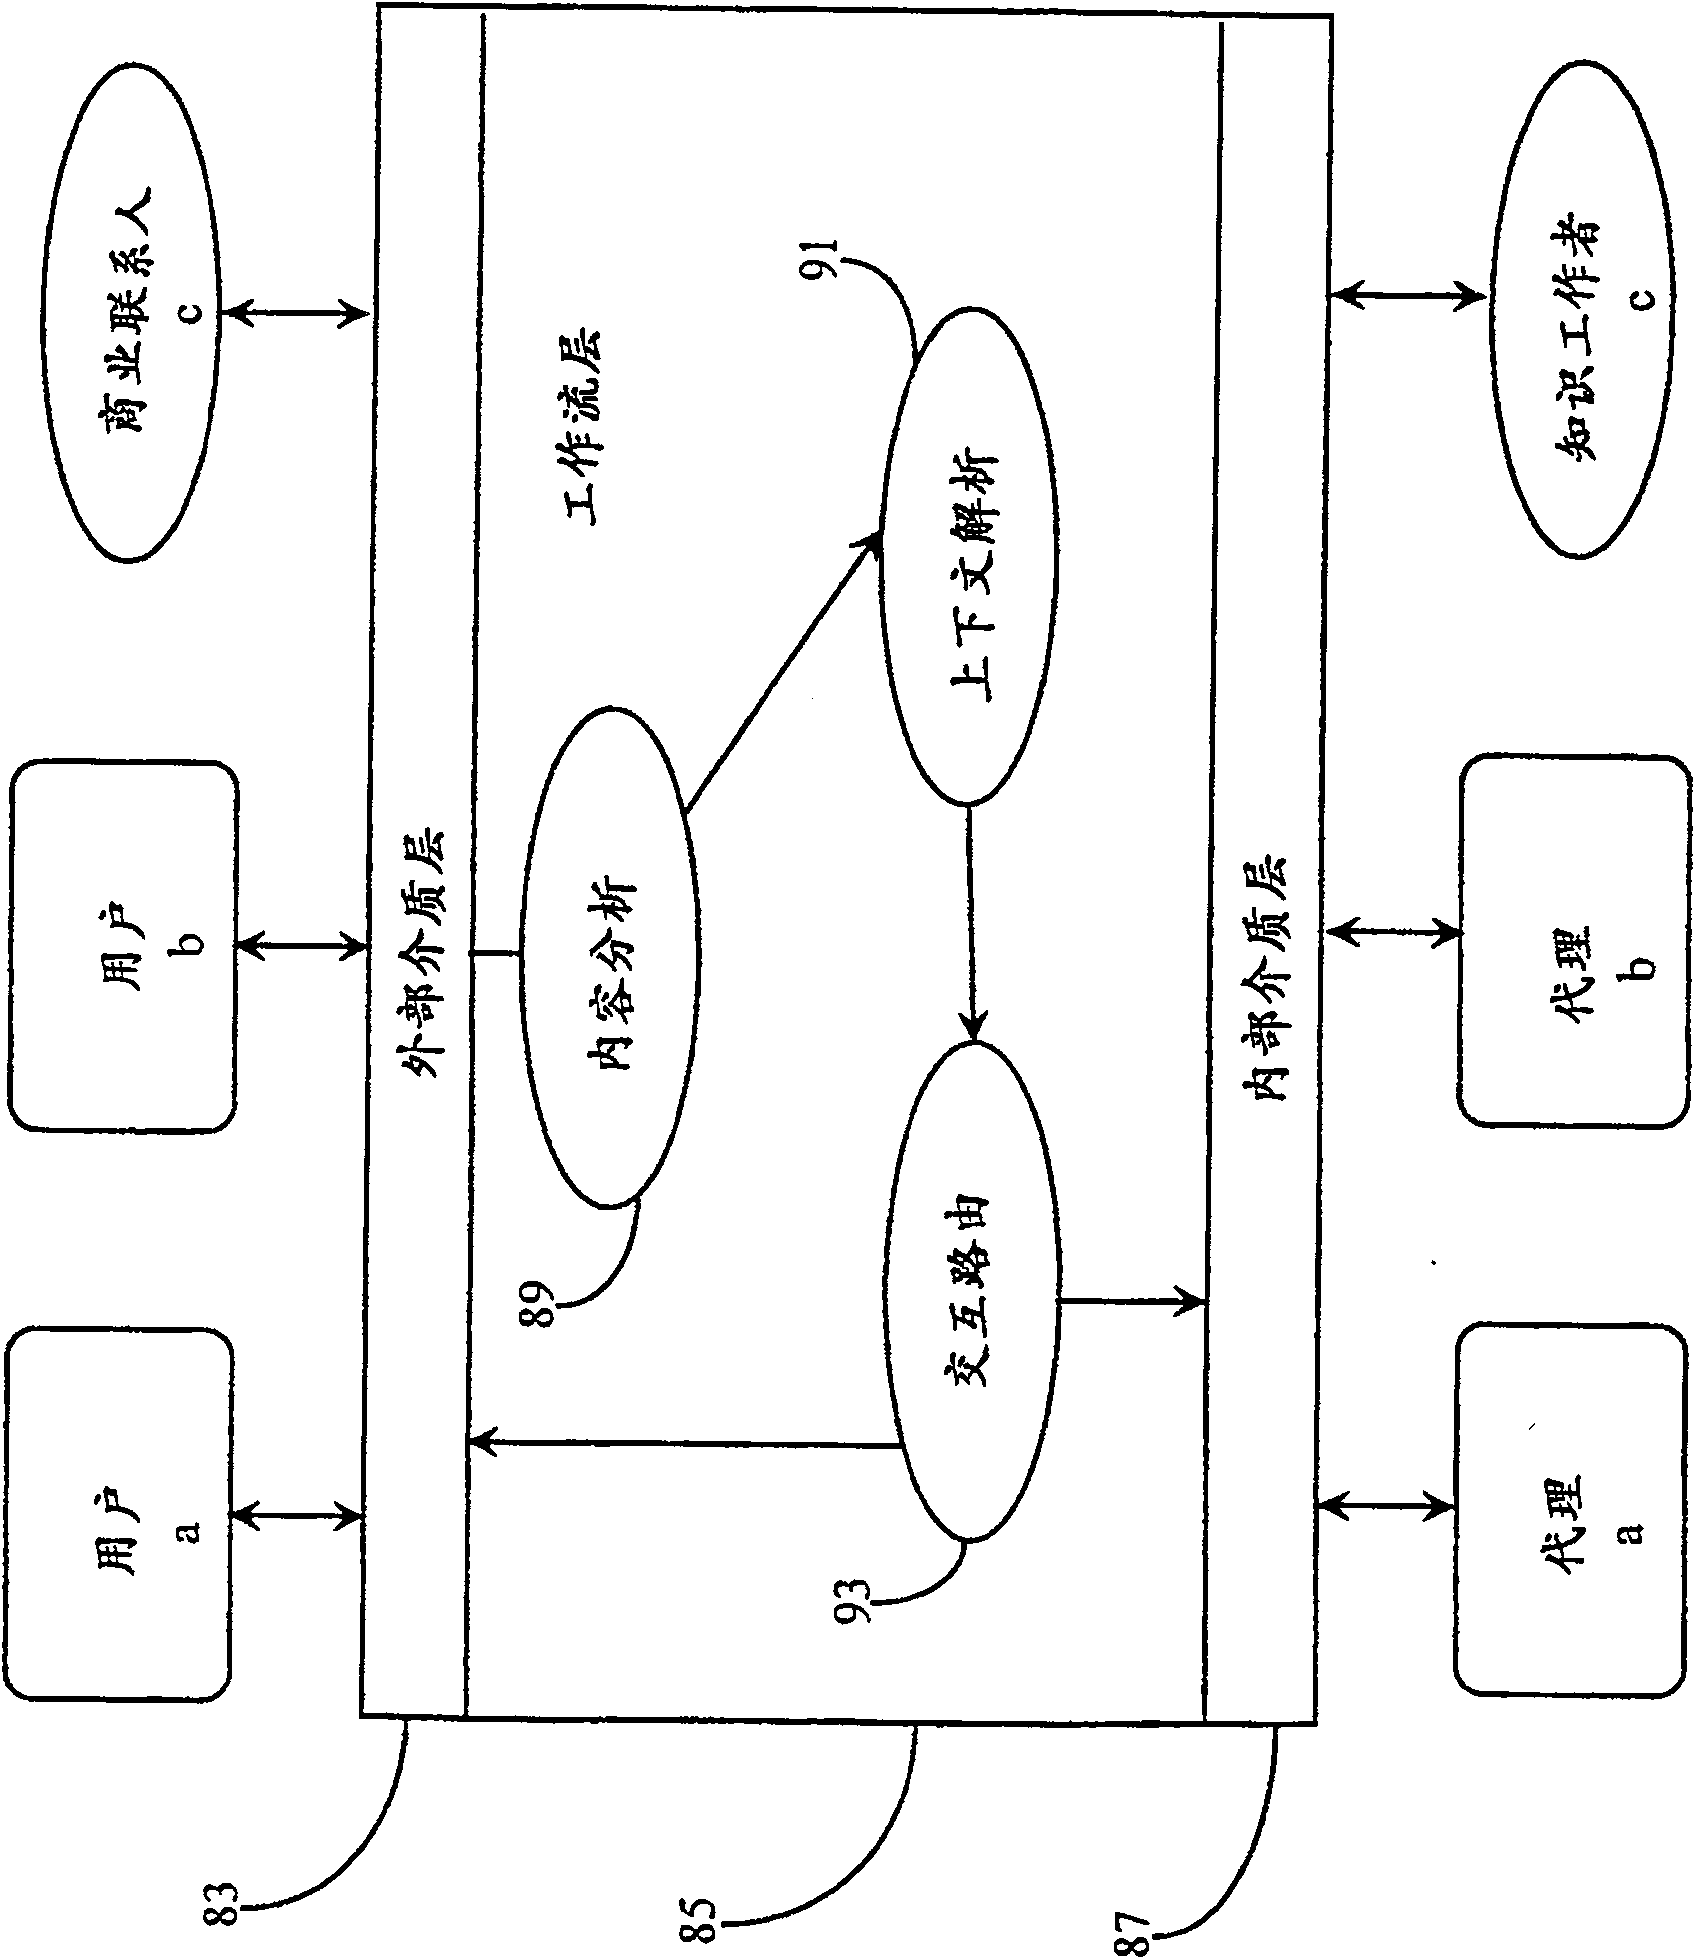 Method for managing interaction between partner for processing transaction